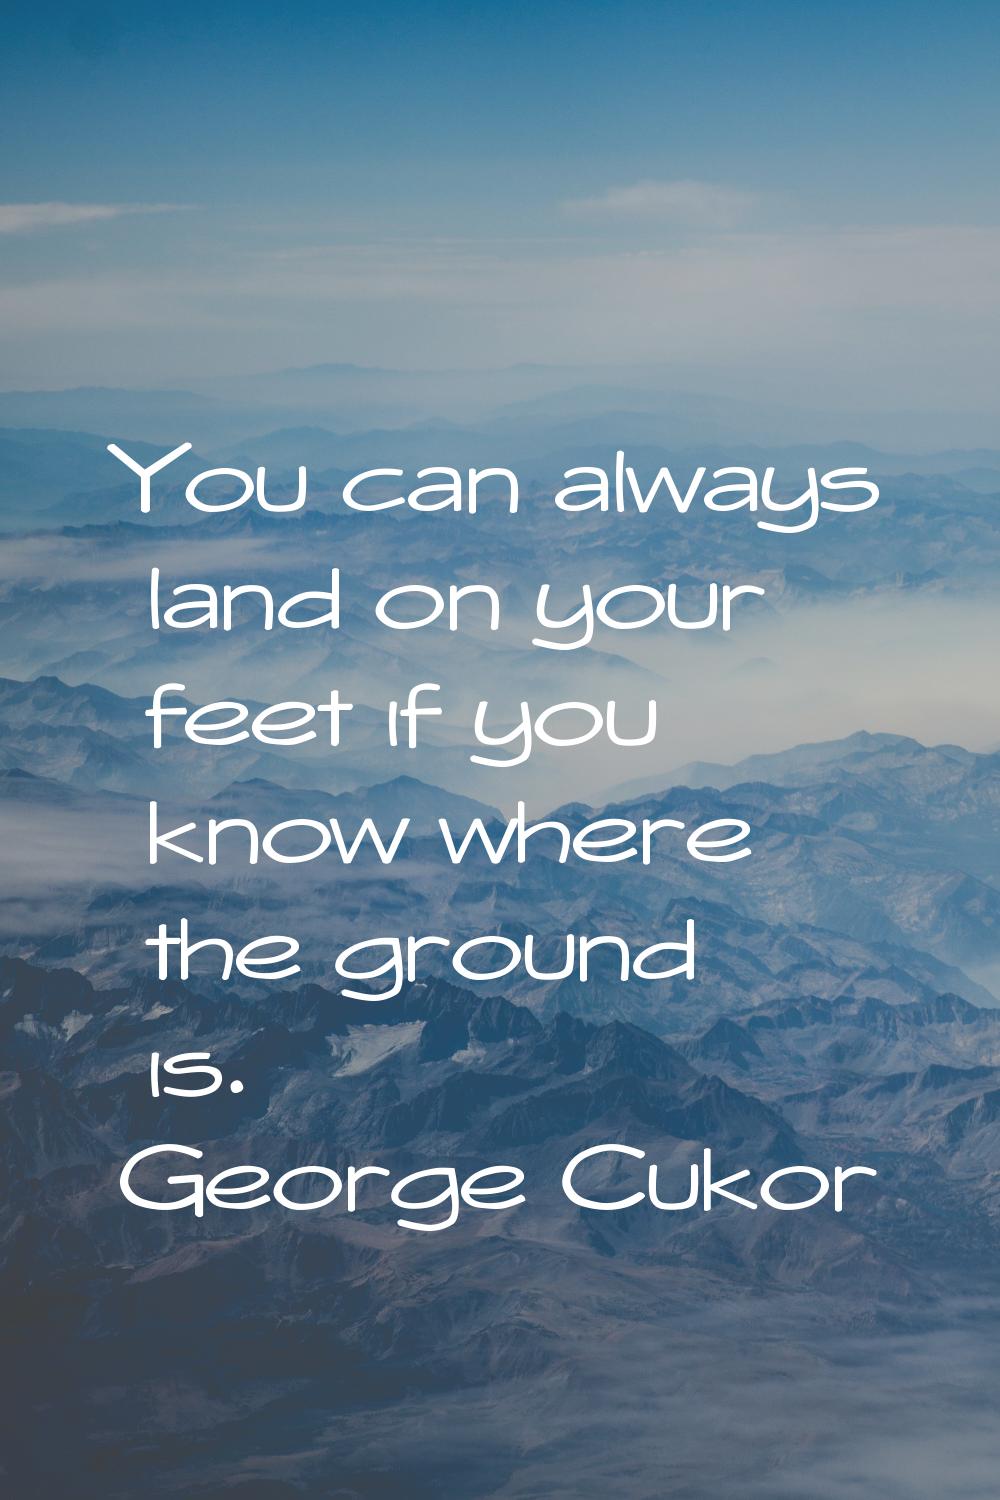 You can always land on your feet if you know where the ground is.